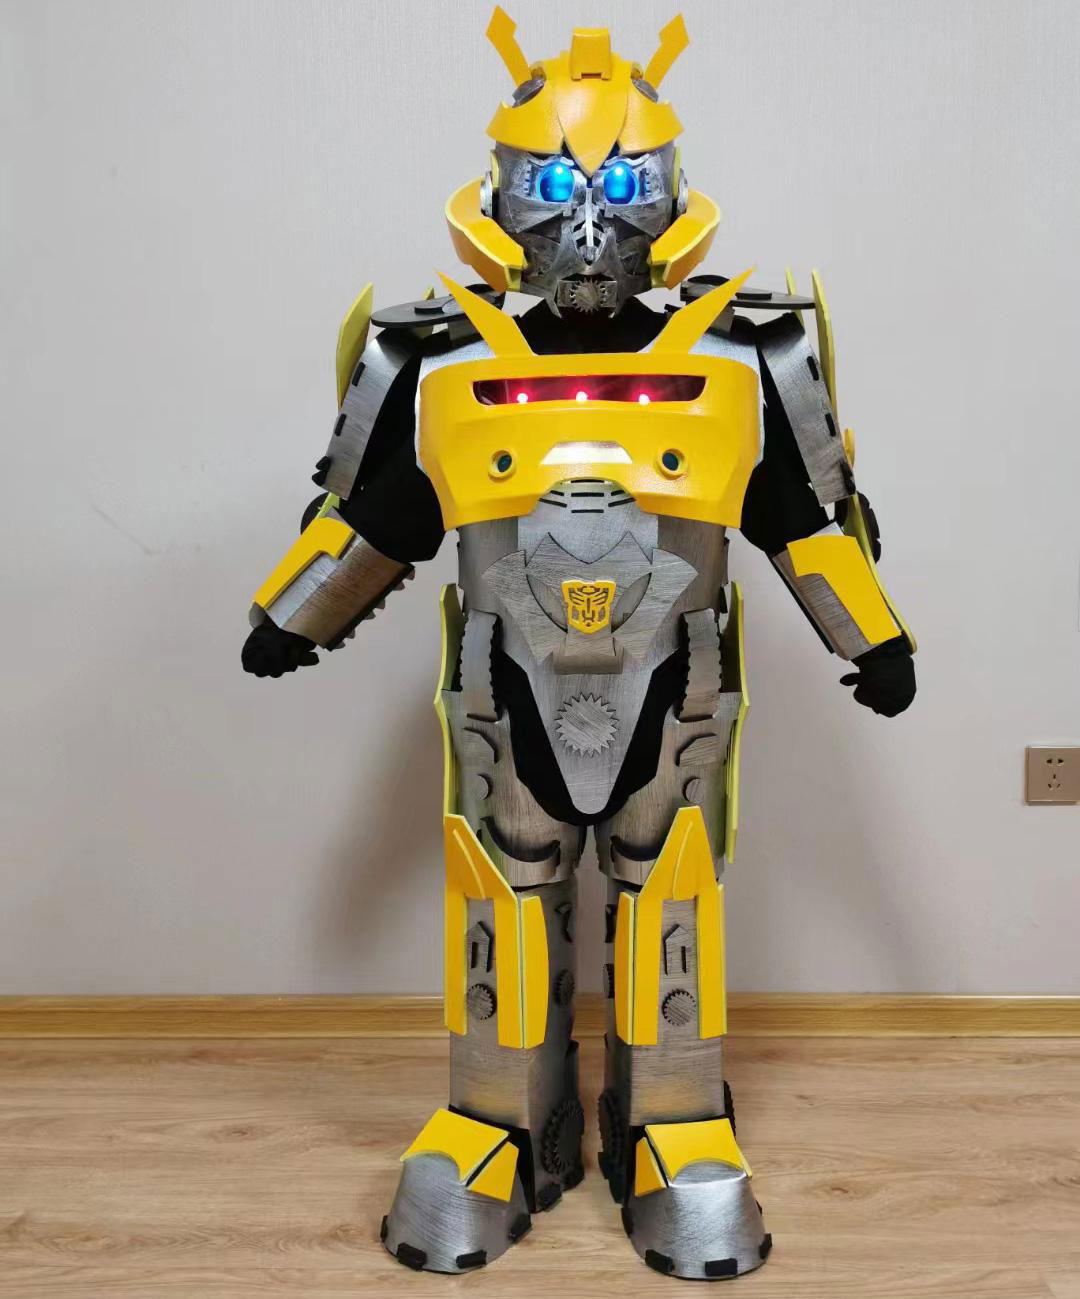 mecha suit anime robot costume with lights for kids to wear